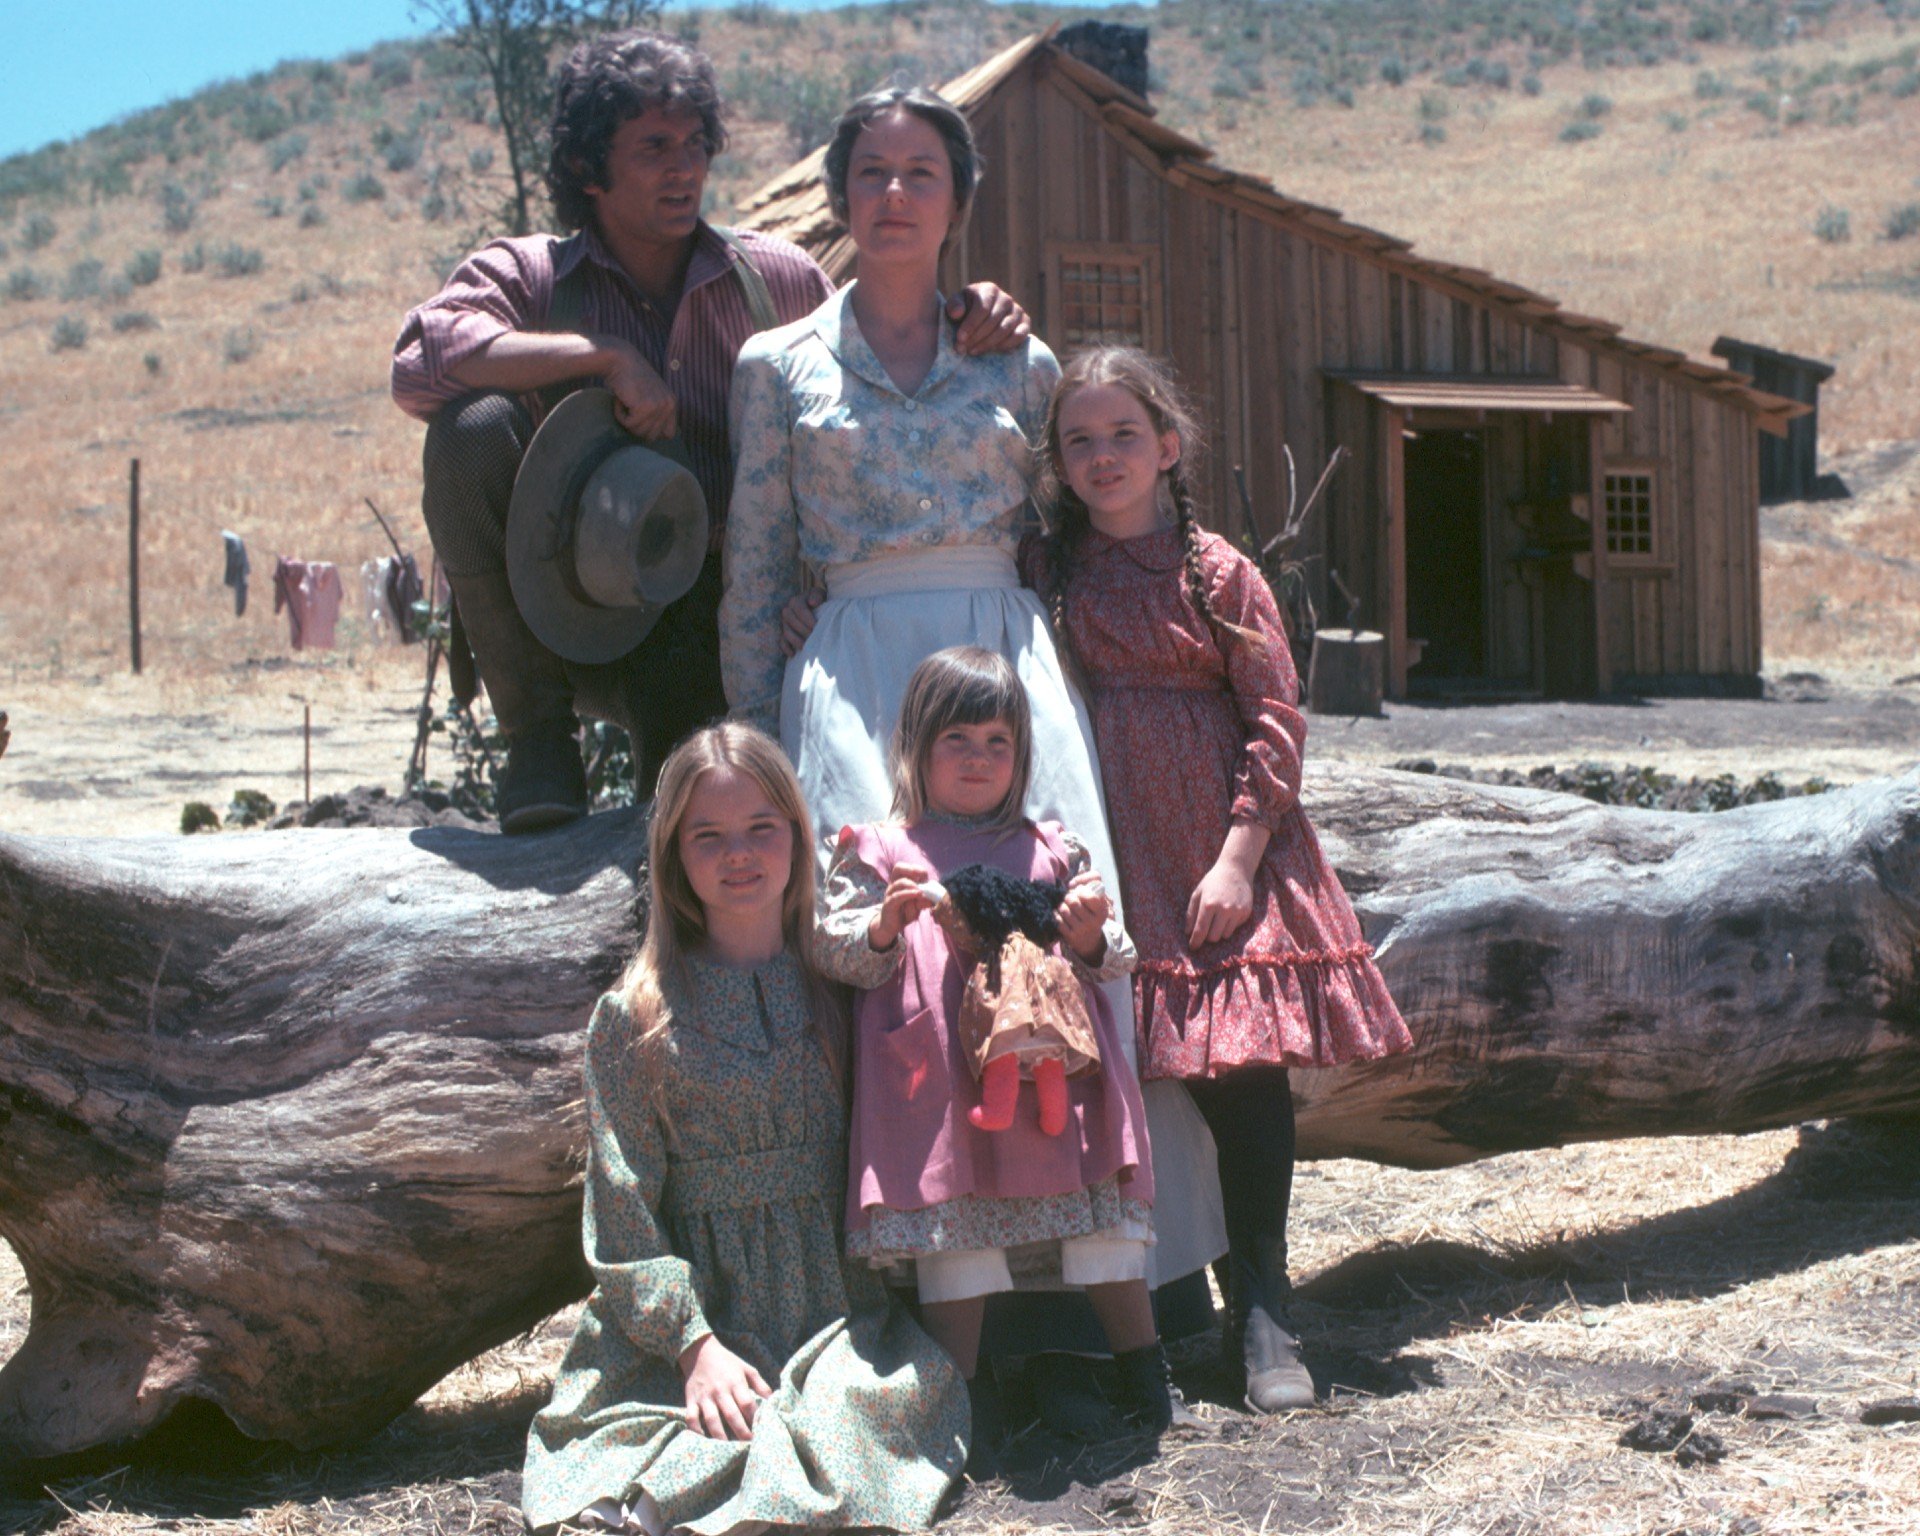 The Little House on the Prairie cast poses for a photo